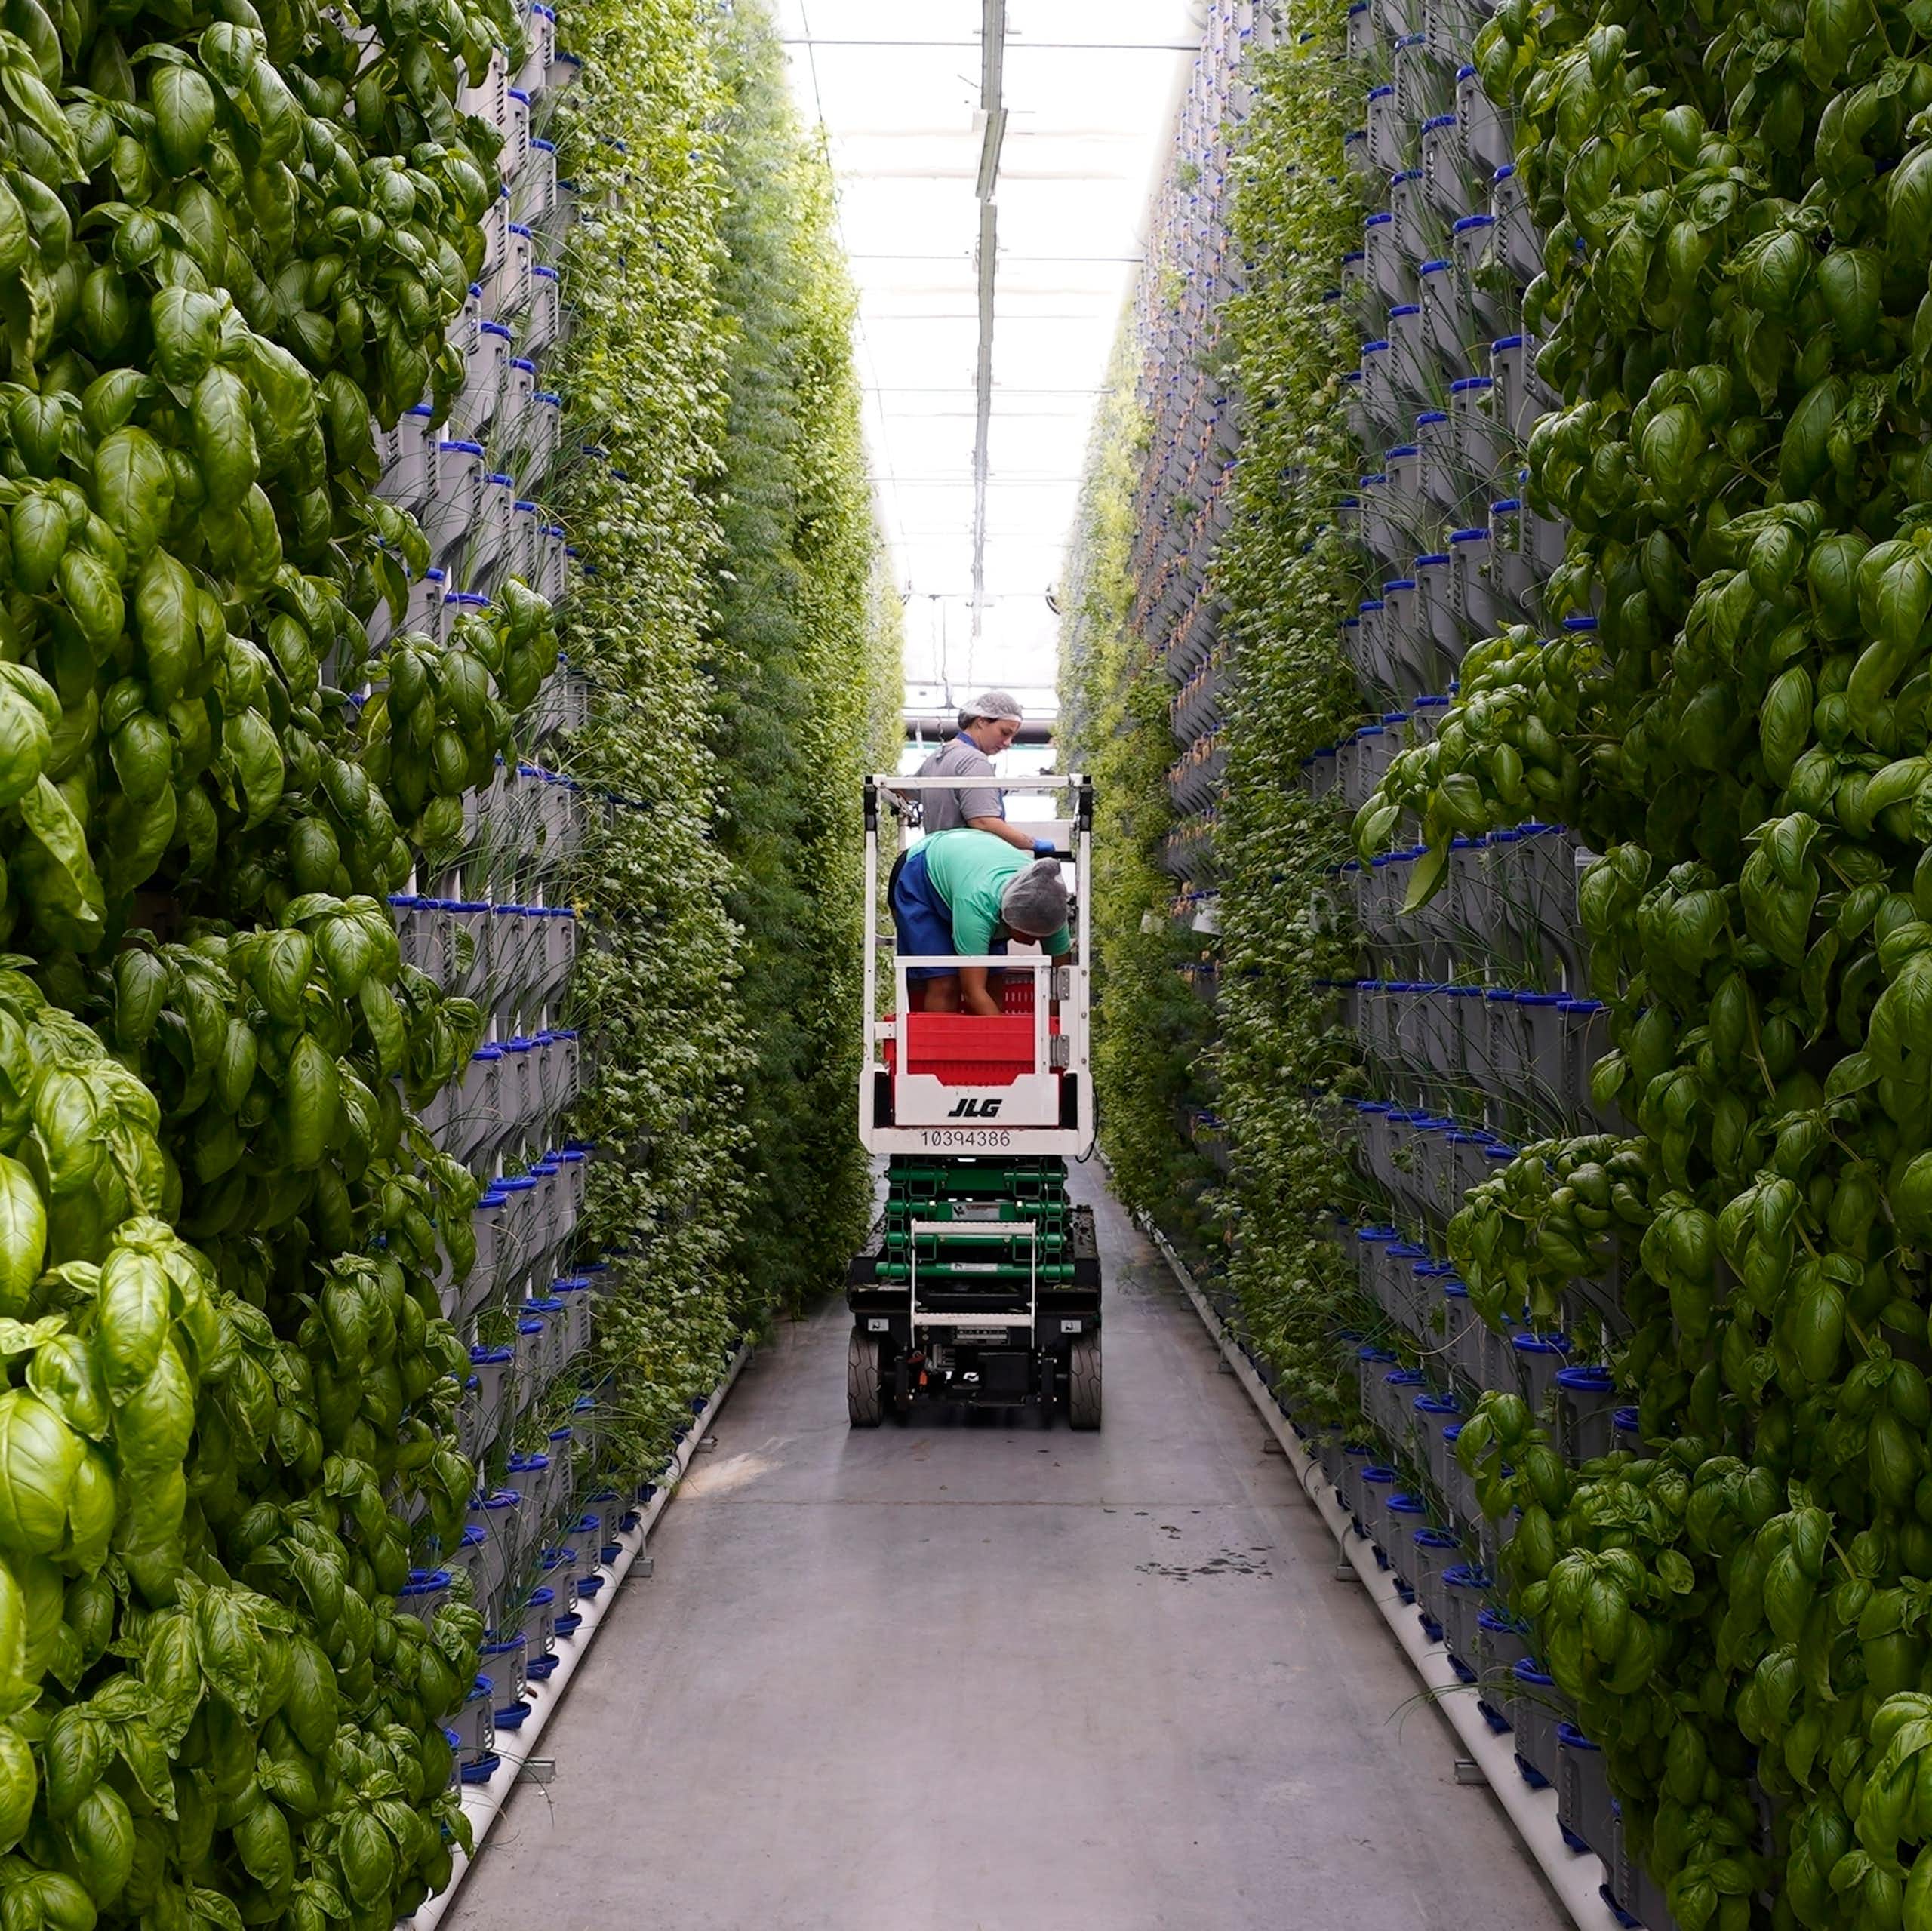 Workers use a lift to examine herbs in an indoor facility.